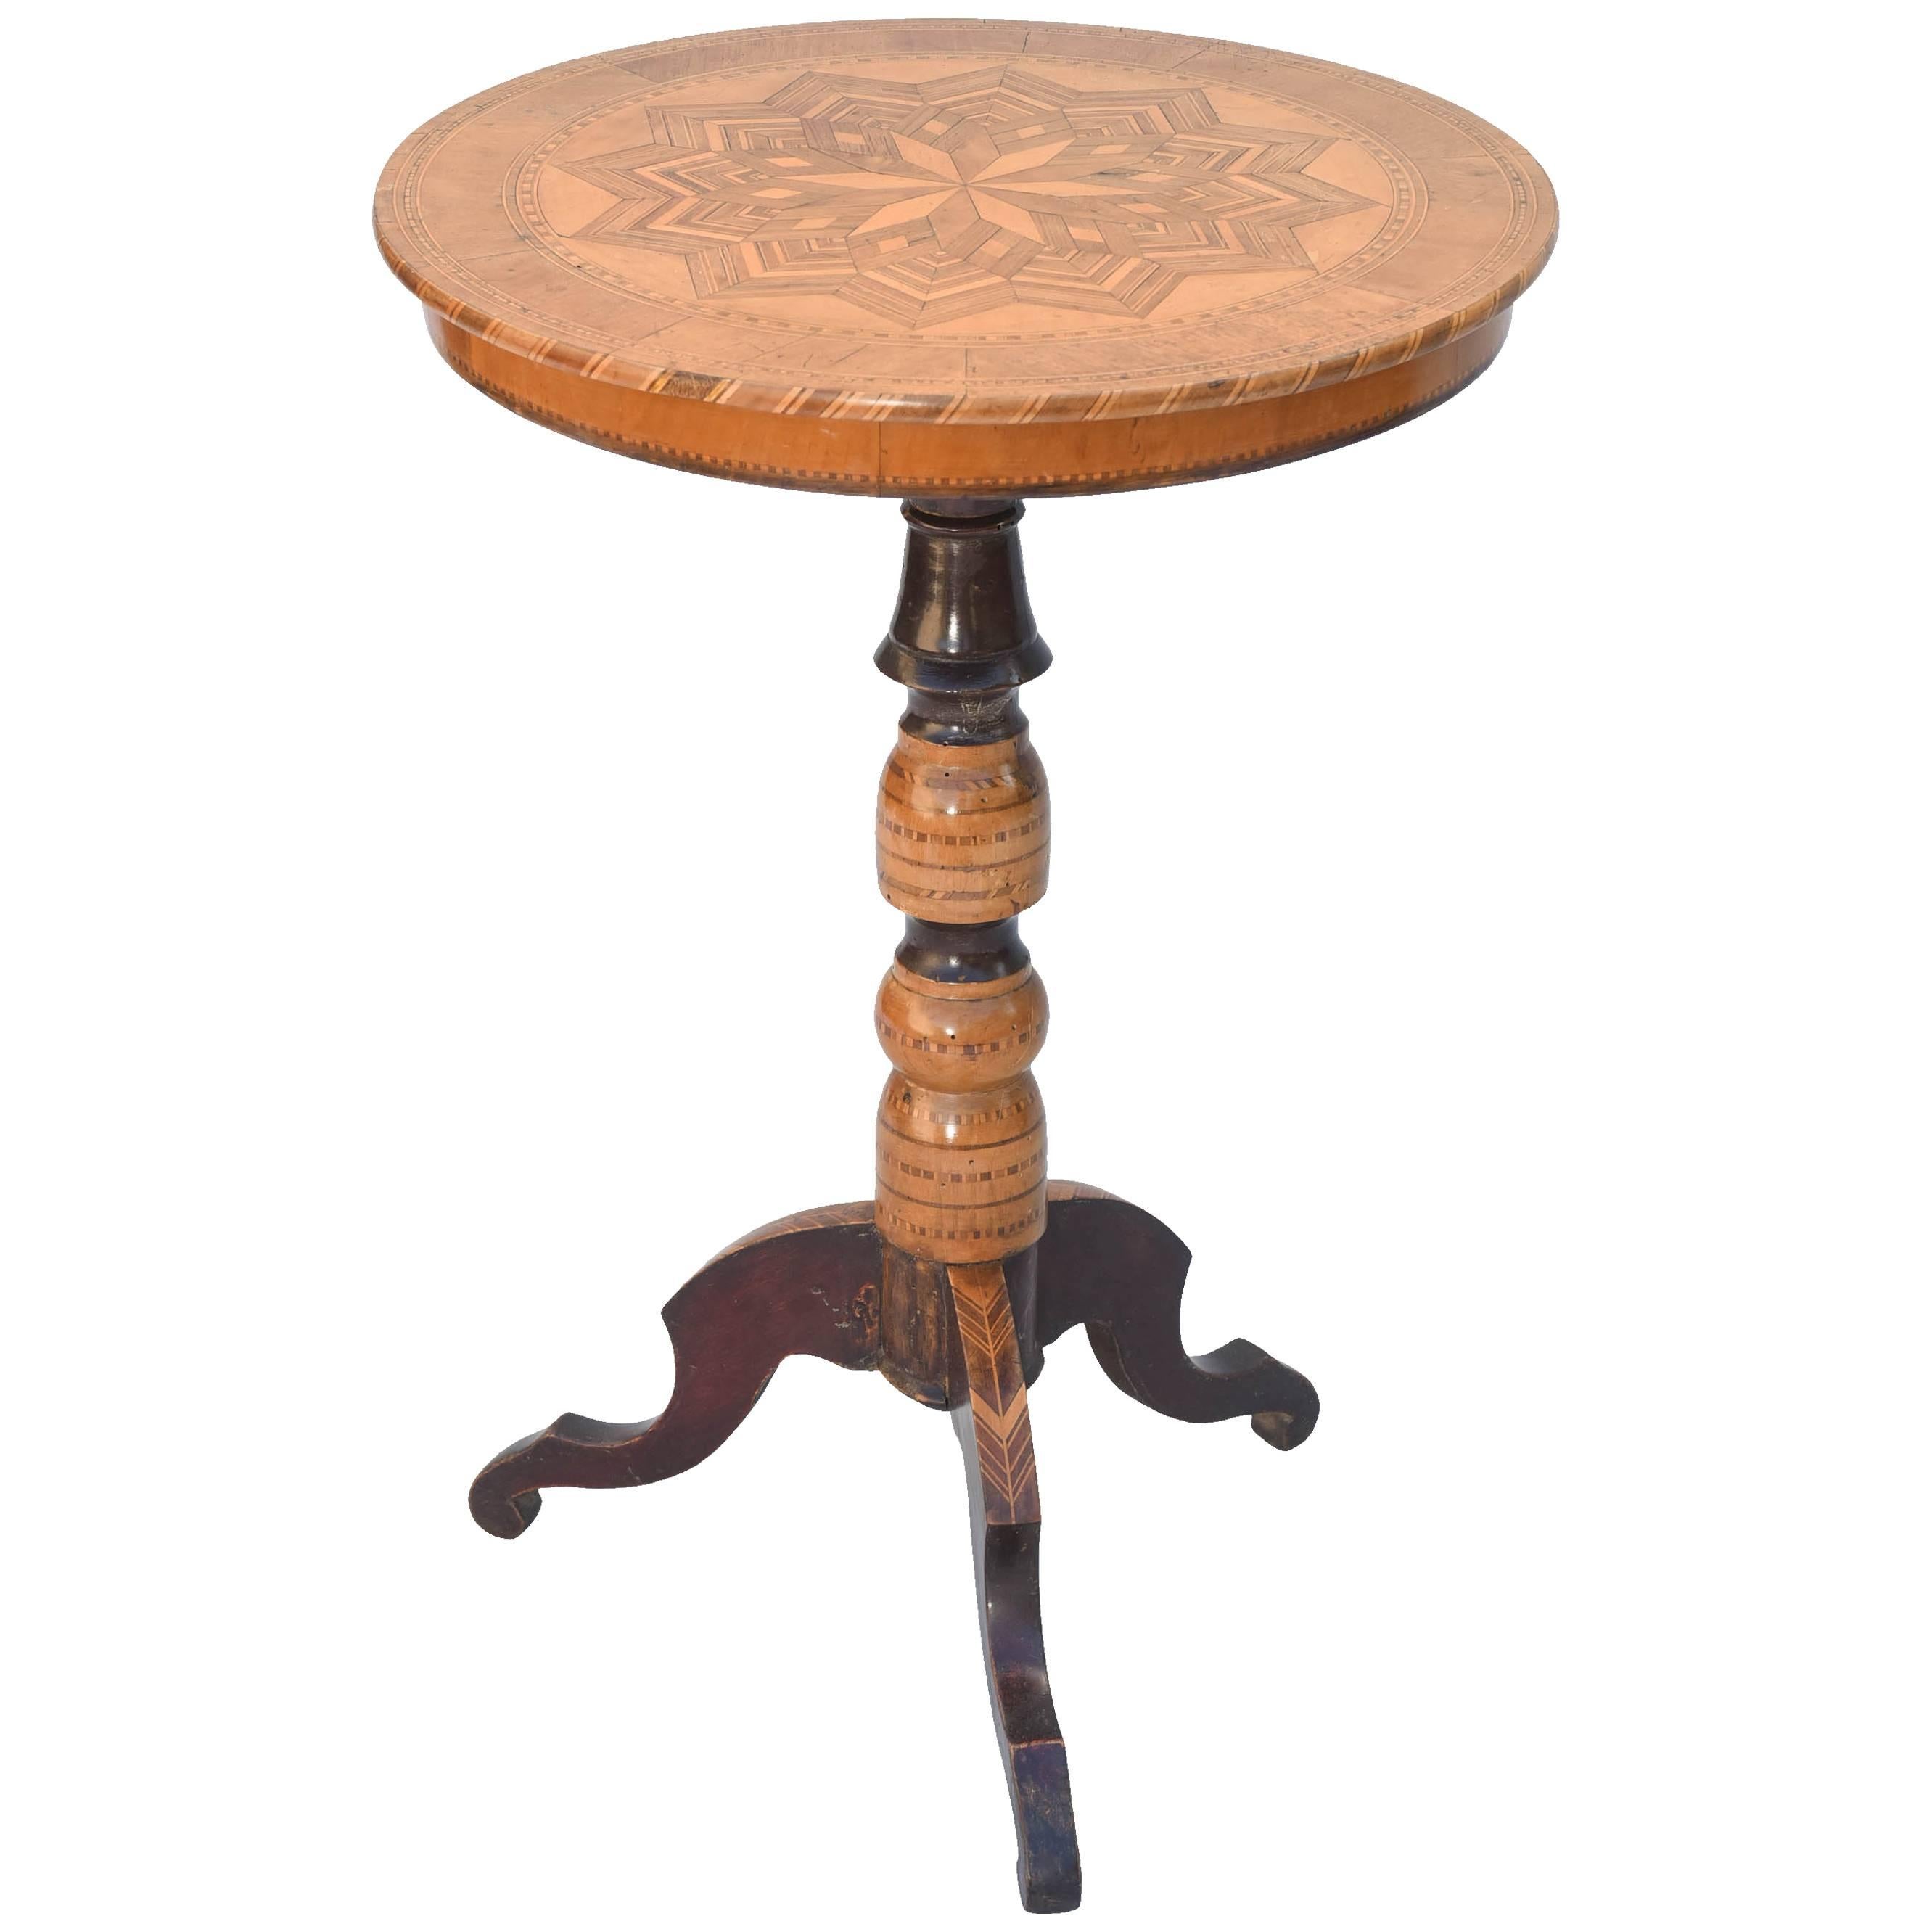 Northern Italian Parquetry Sorrento Table